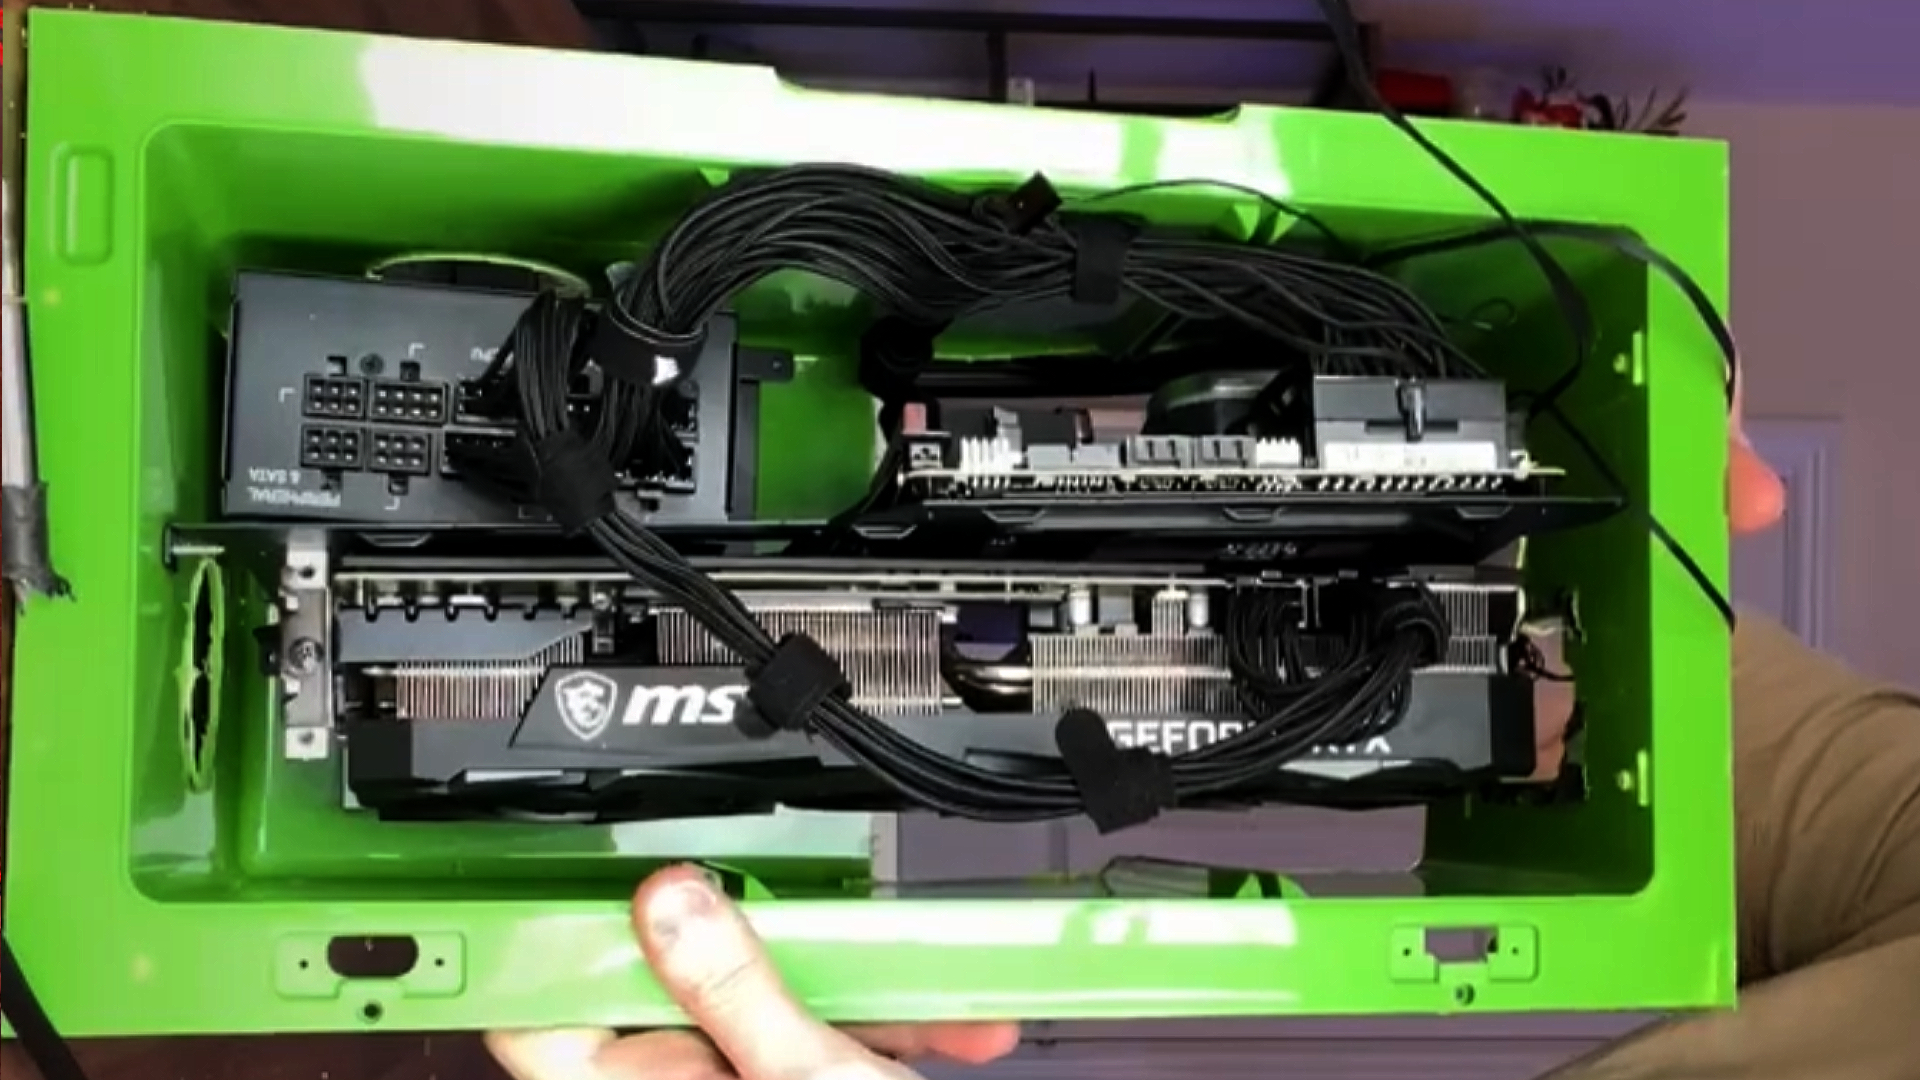 Inside Xbox fridge gaming PC with Nvidia RTX GPU in view